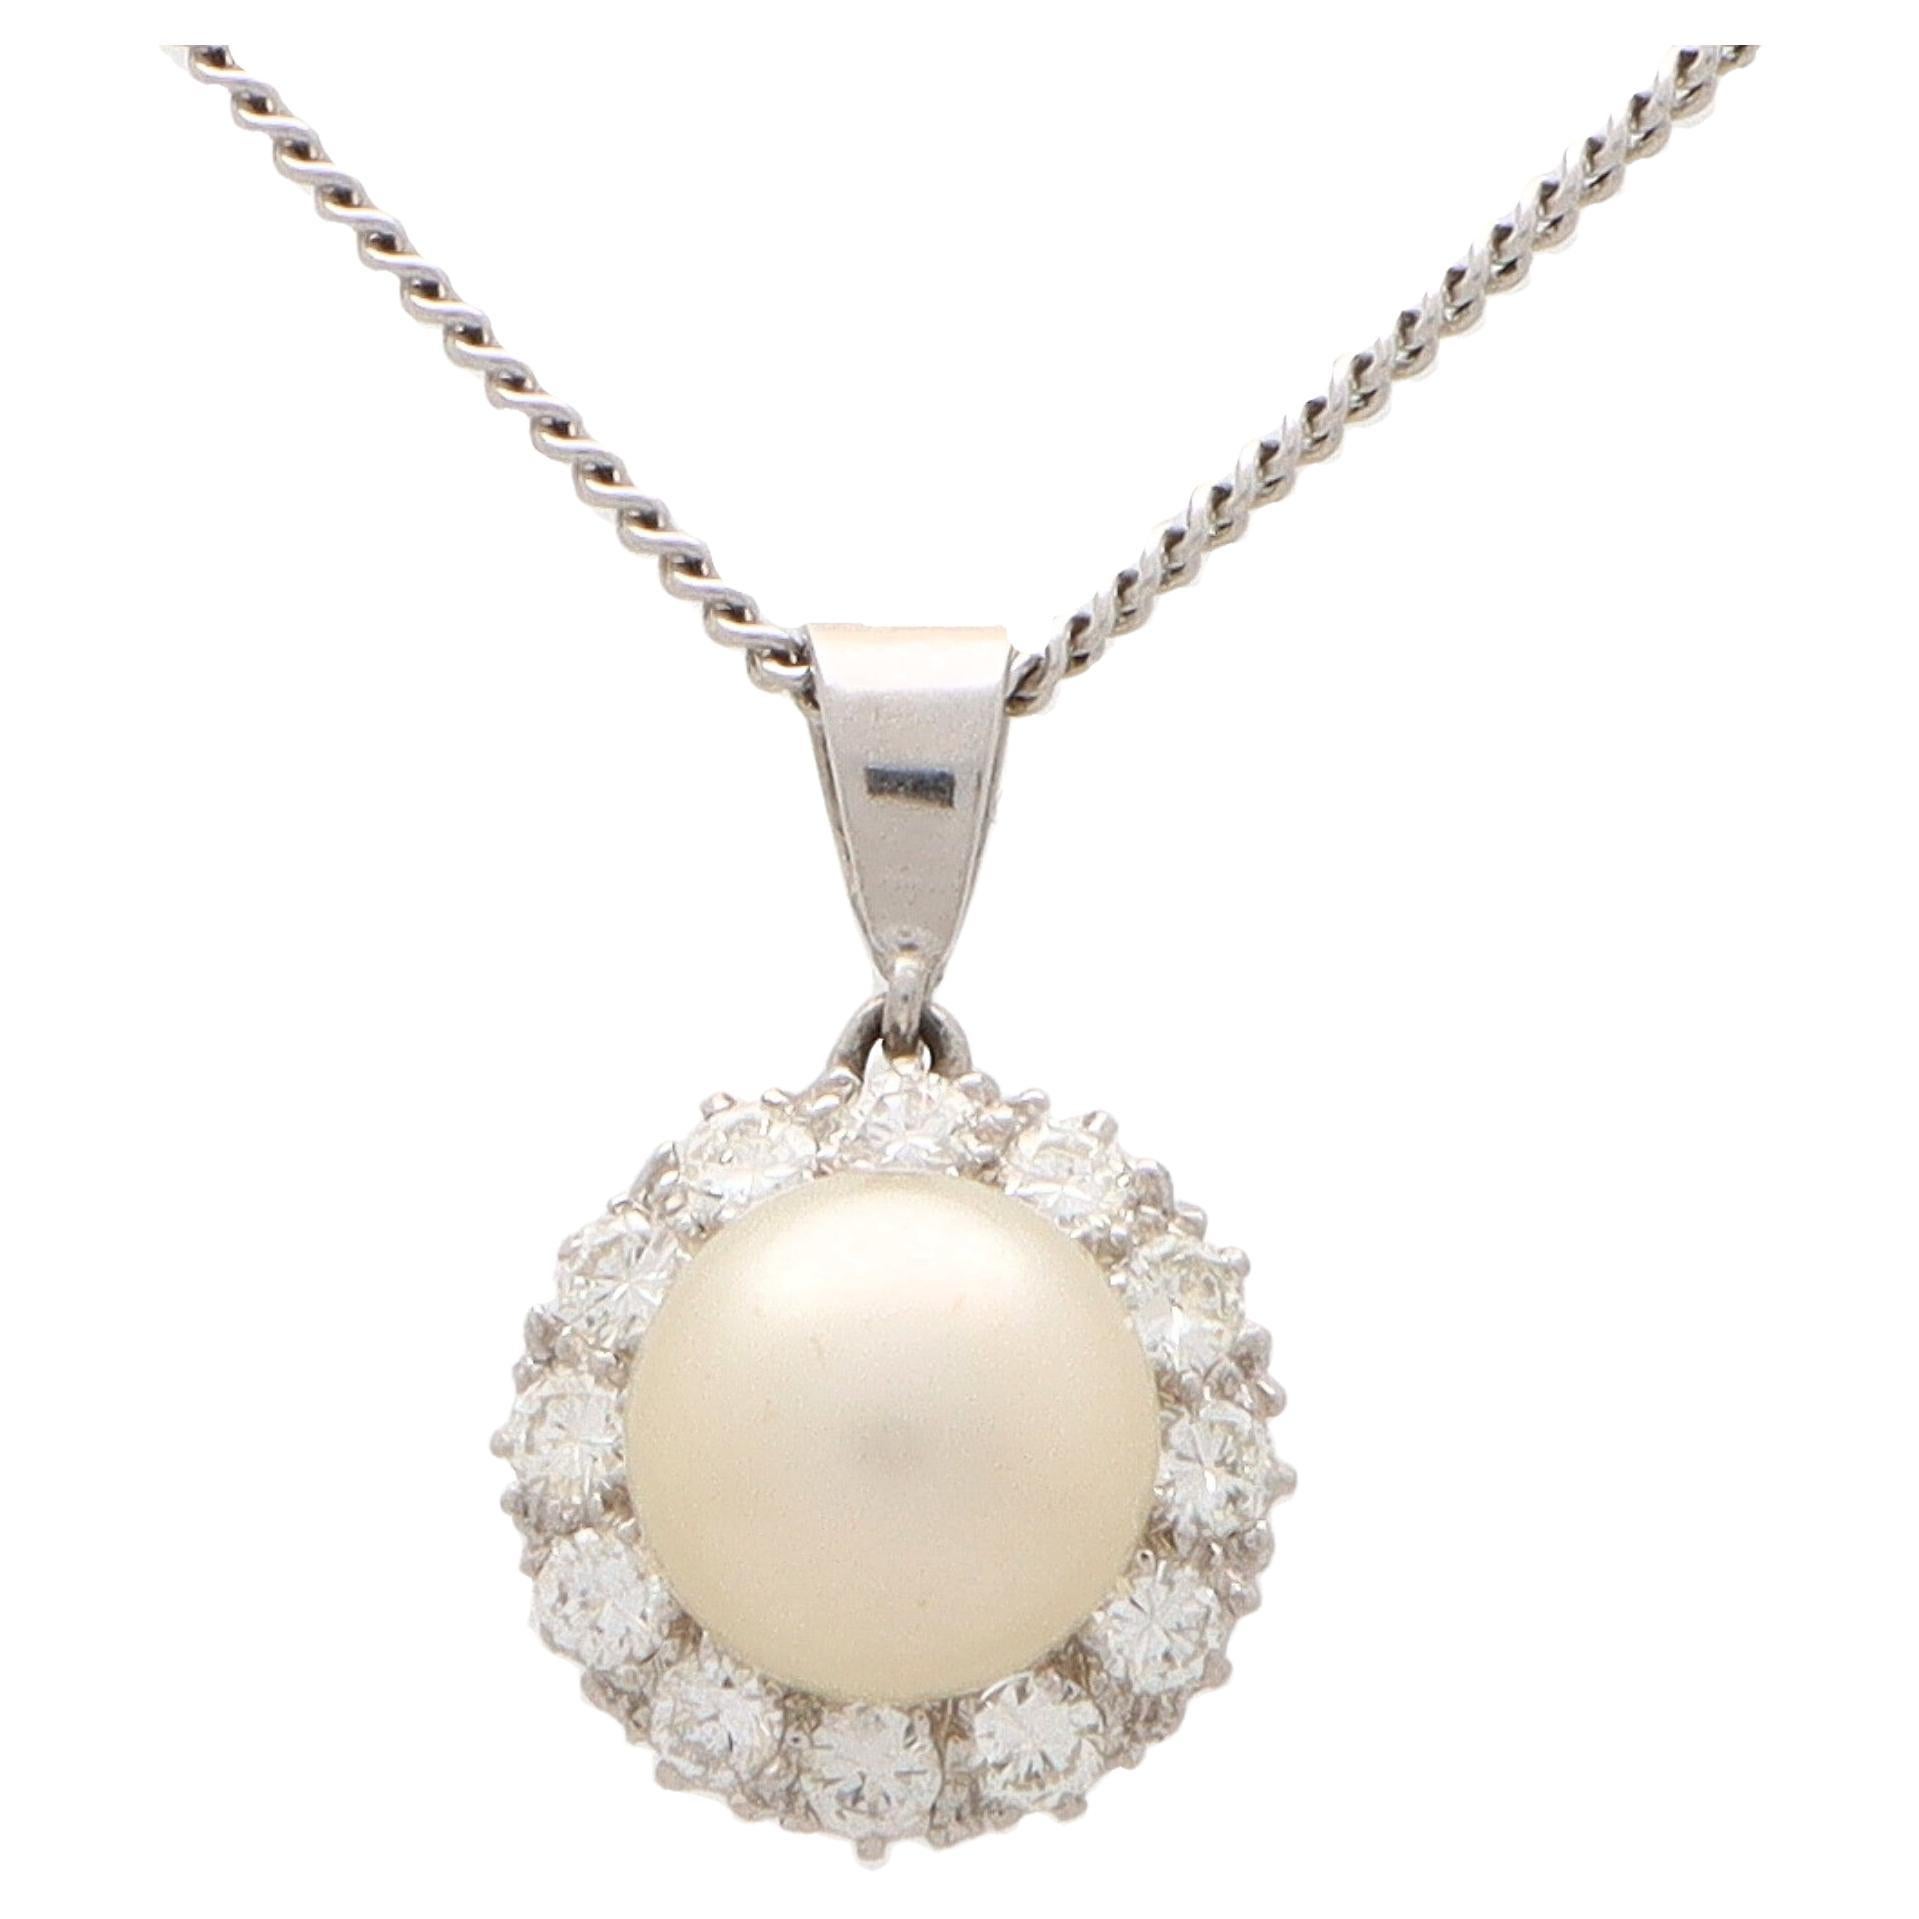 Diamond and Pearl Pendant Necklace Set in 9k White Gold